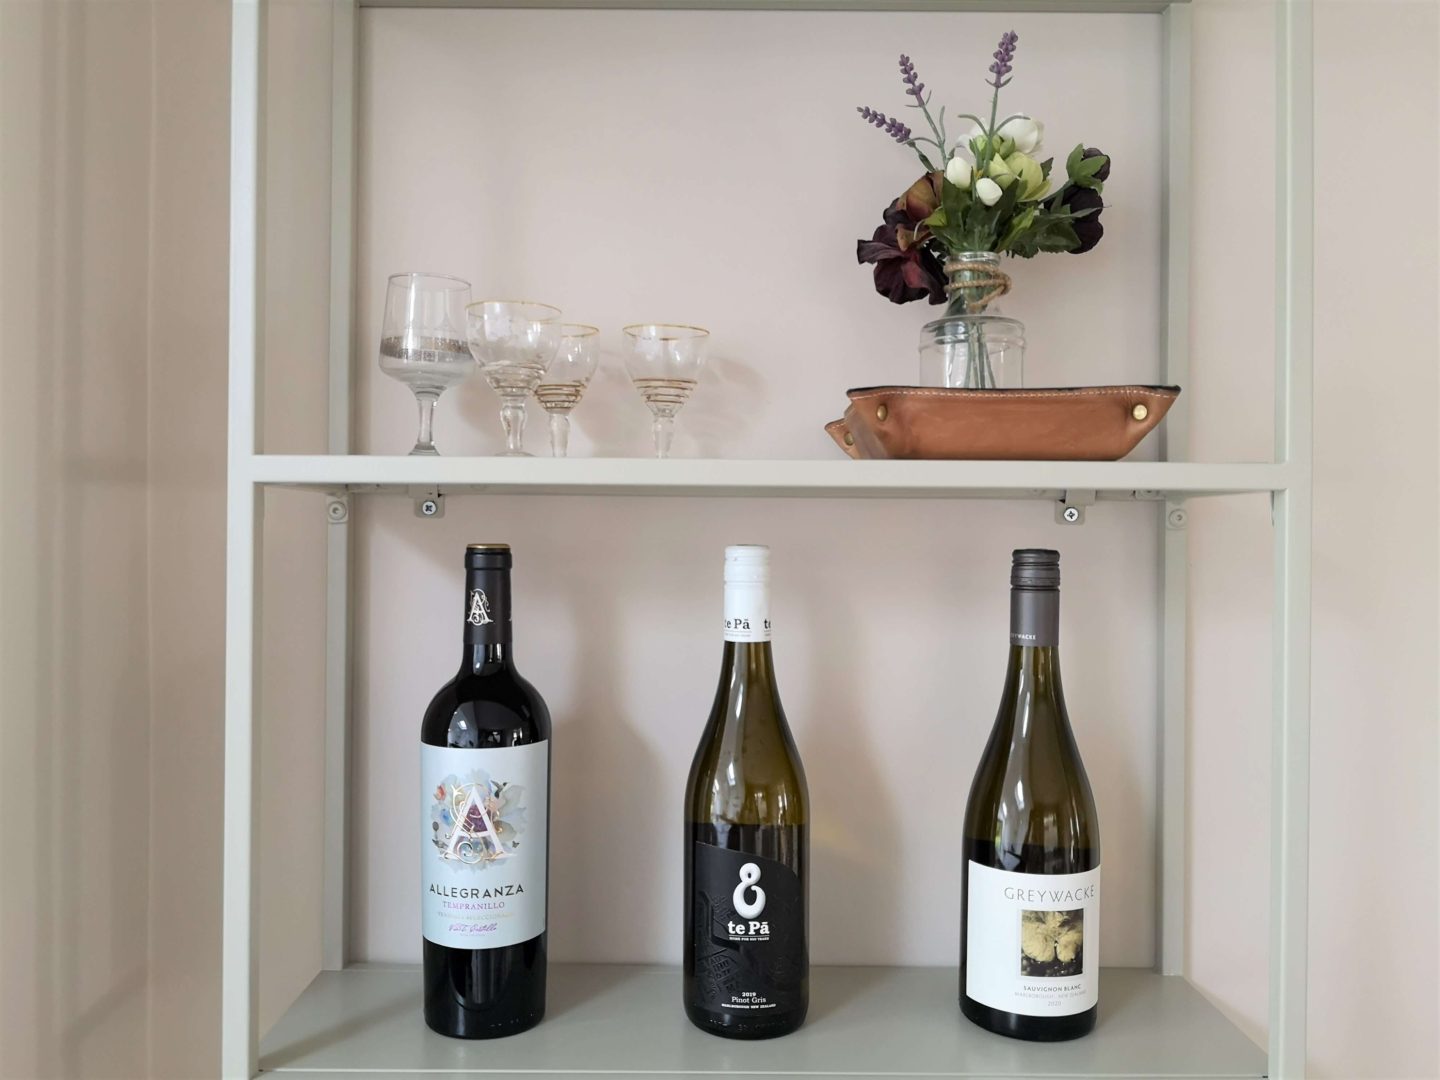 A close up of metal shelving, showing vintage glasses, flowers and three bottles of wine.